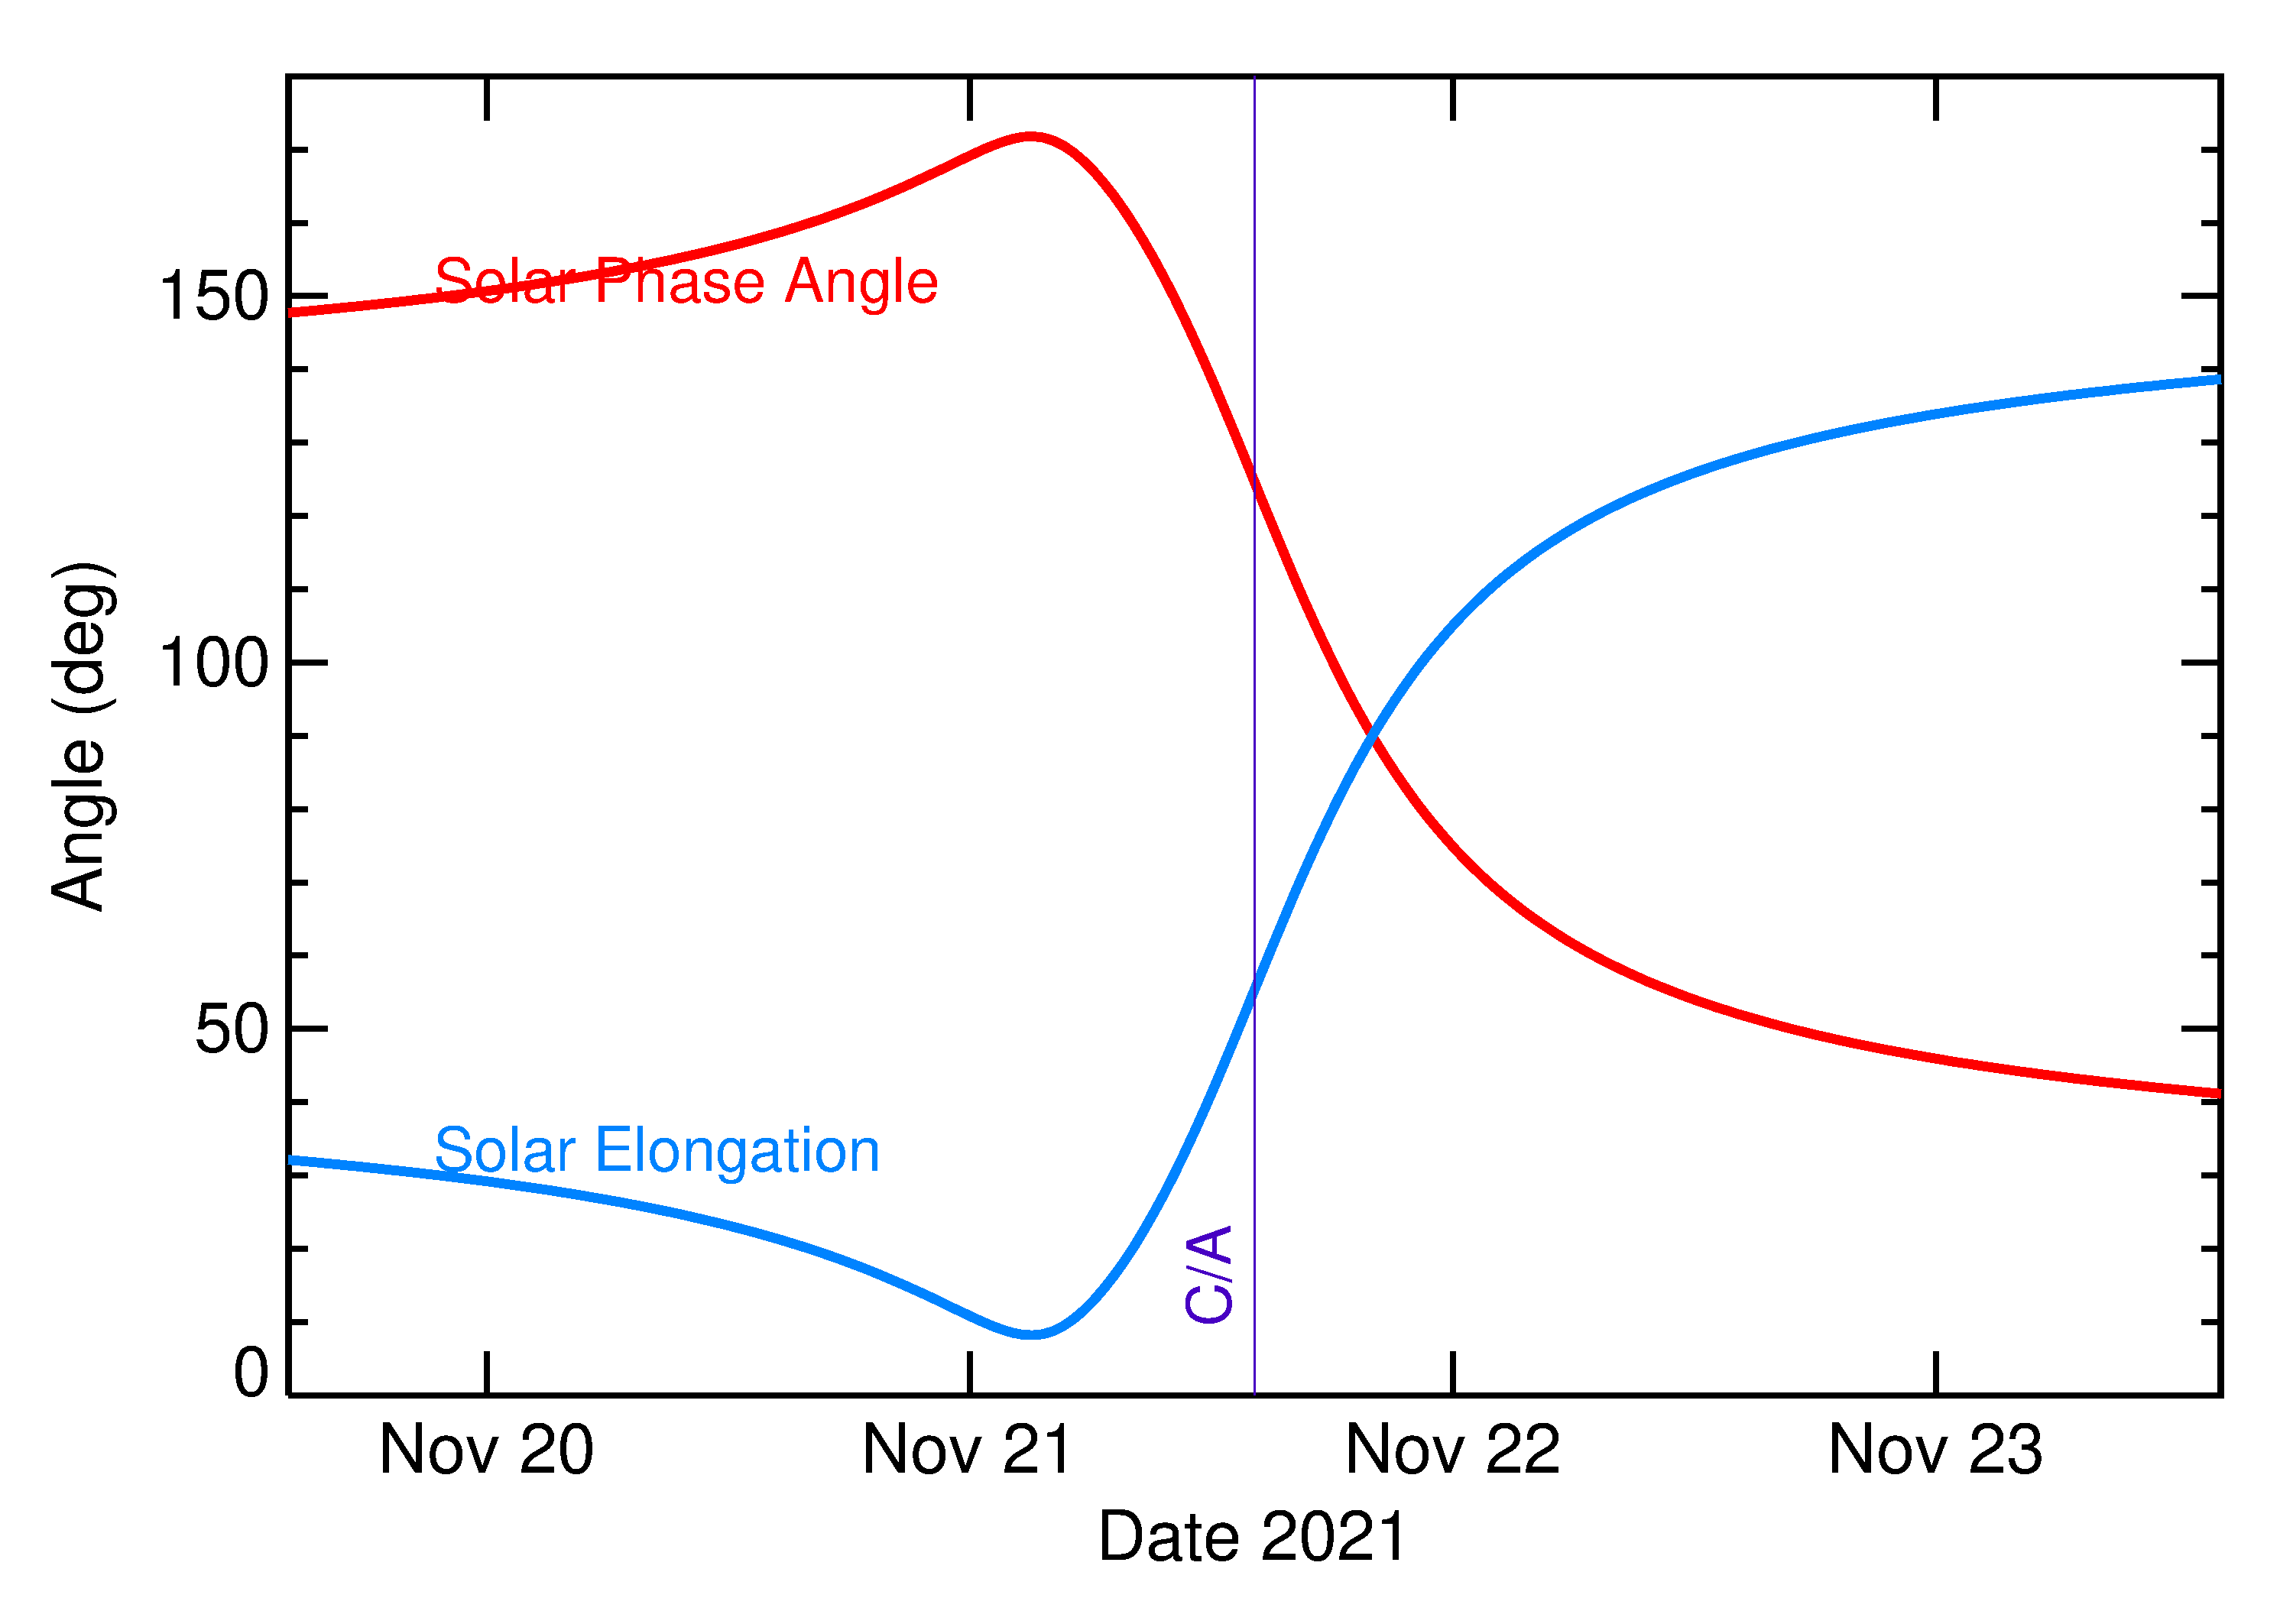 Solar Elongation and Solar Phase Angle of 2021 WP in the days around closest approach